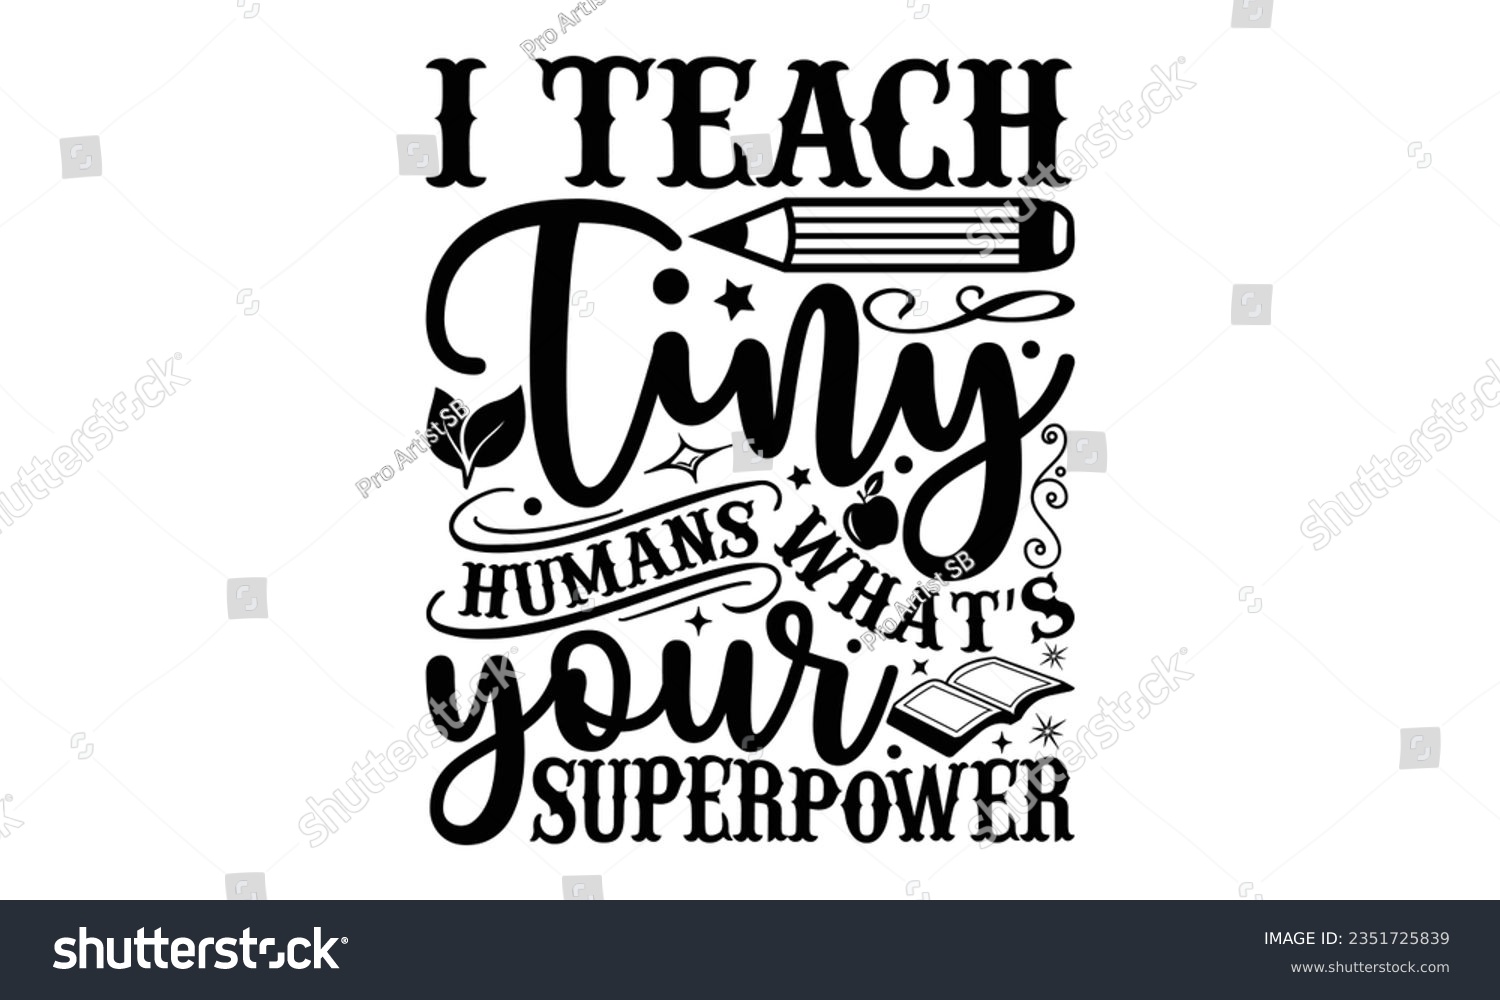 SVG of I teach tiny humans what’s your superpower - Teacher SVG Design, Teacher Lettering Design, Vector EPS Editable Files, Isolated On White Background, Prints on T-Shirts and Bags, Posters, Cards. svg